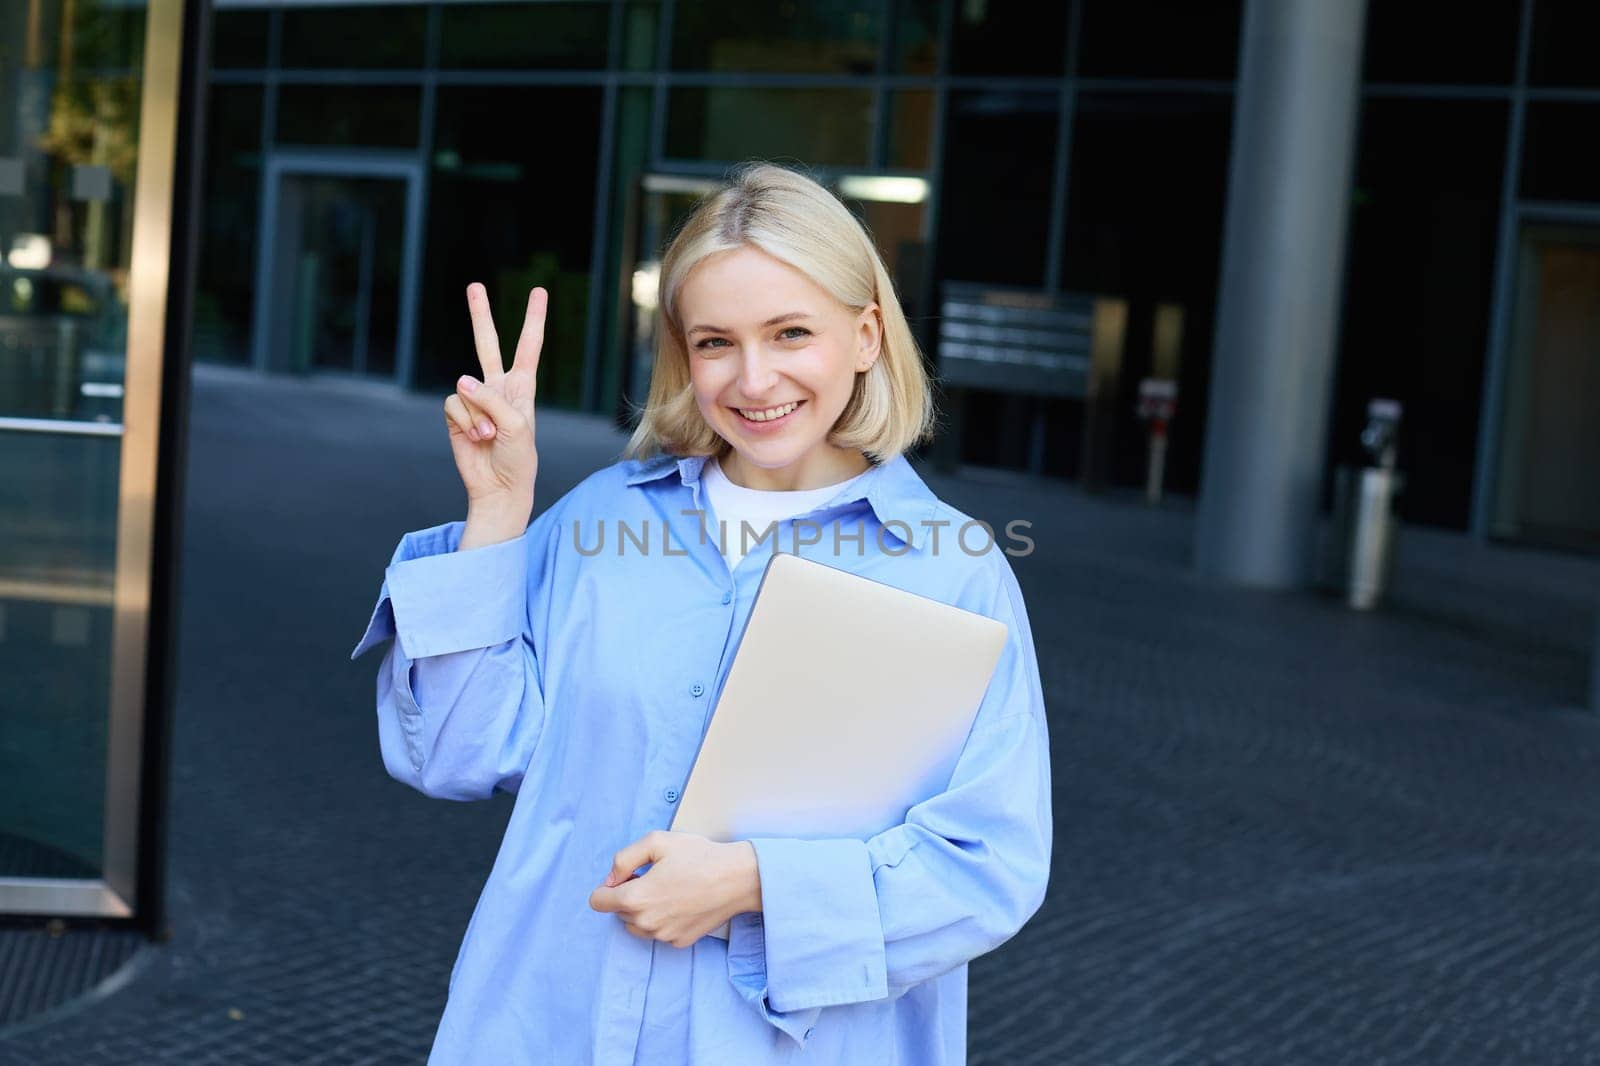 Young positive female model, student with notebooks and study material showing peace sign, standing near university, college campus, promo for new education scheme.